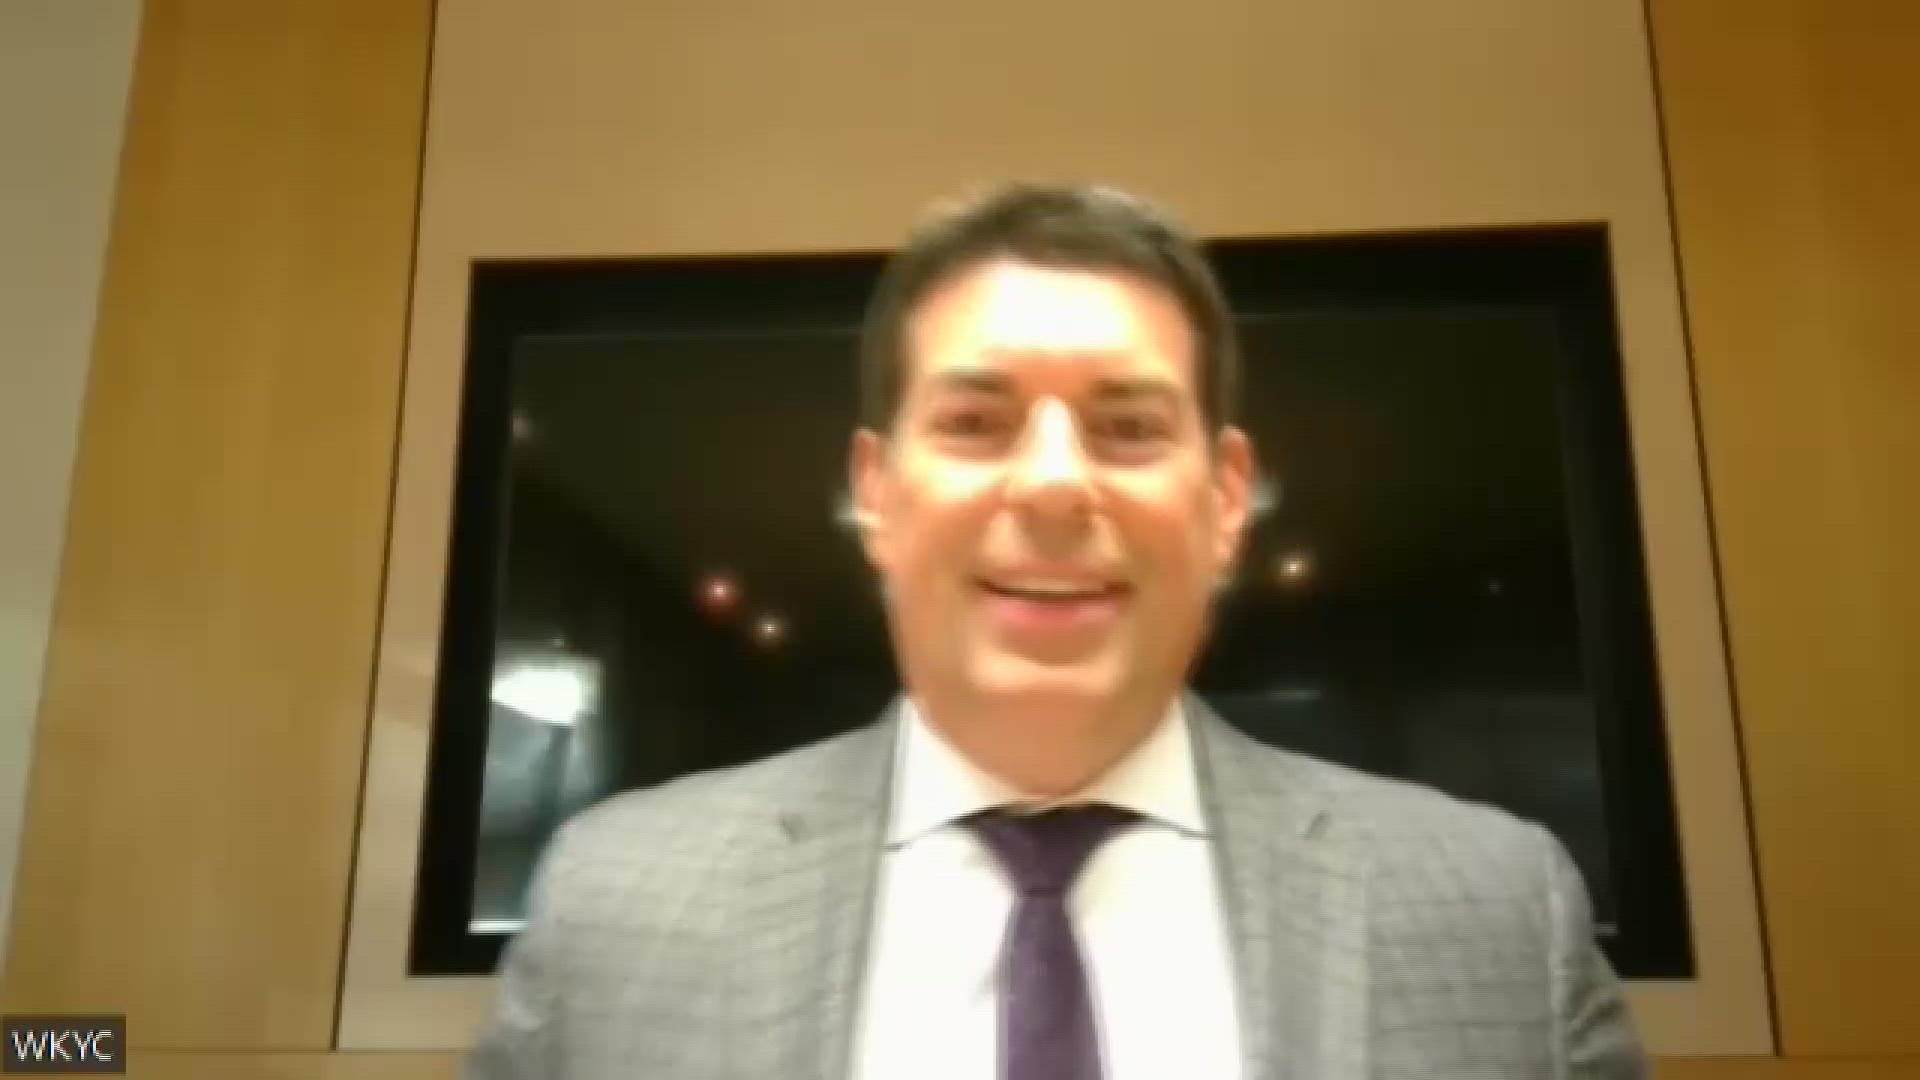 Election Day 2022 is here. 3News' Dave Chudowsky spoke with Ohio Secretary of State Frank LaRose to discuss the process, election security and new voting stickers.